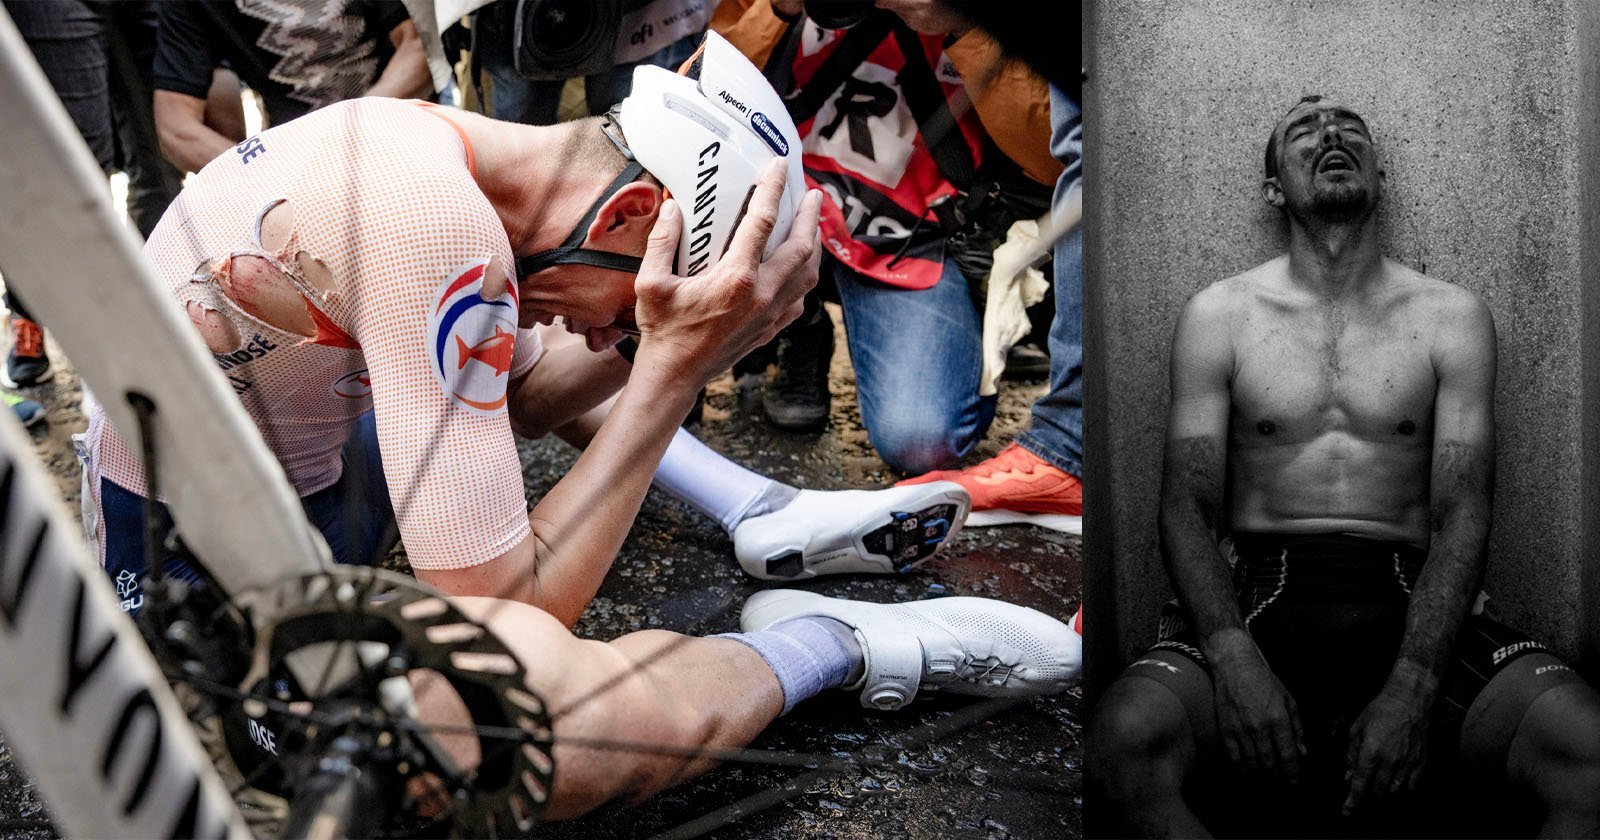 Photographer Captures the Suffering Endured by Professional Cyclists